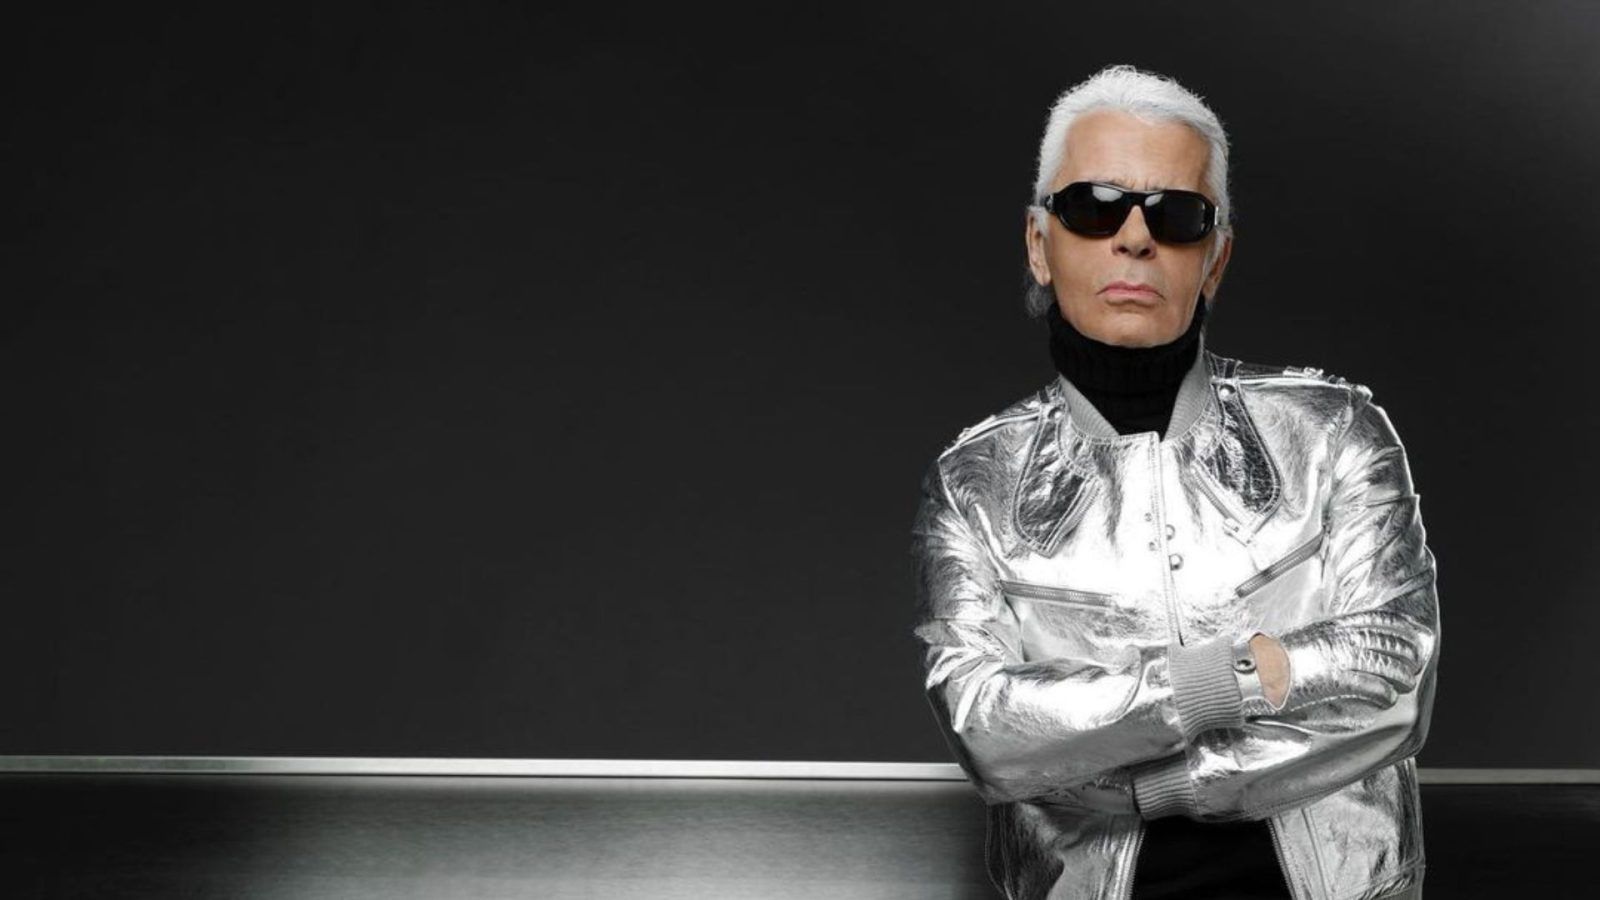 7 interesting facts about iconic designer Karl Lagerfeld you didn